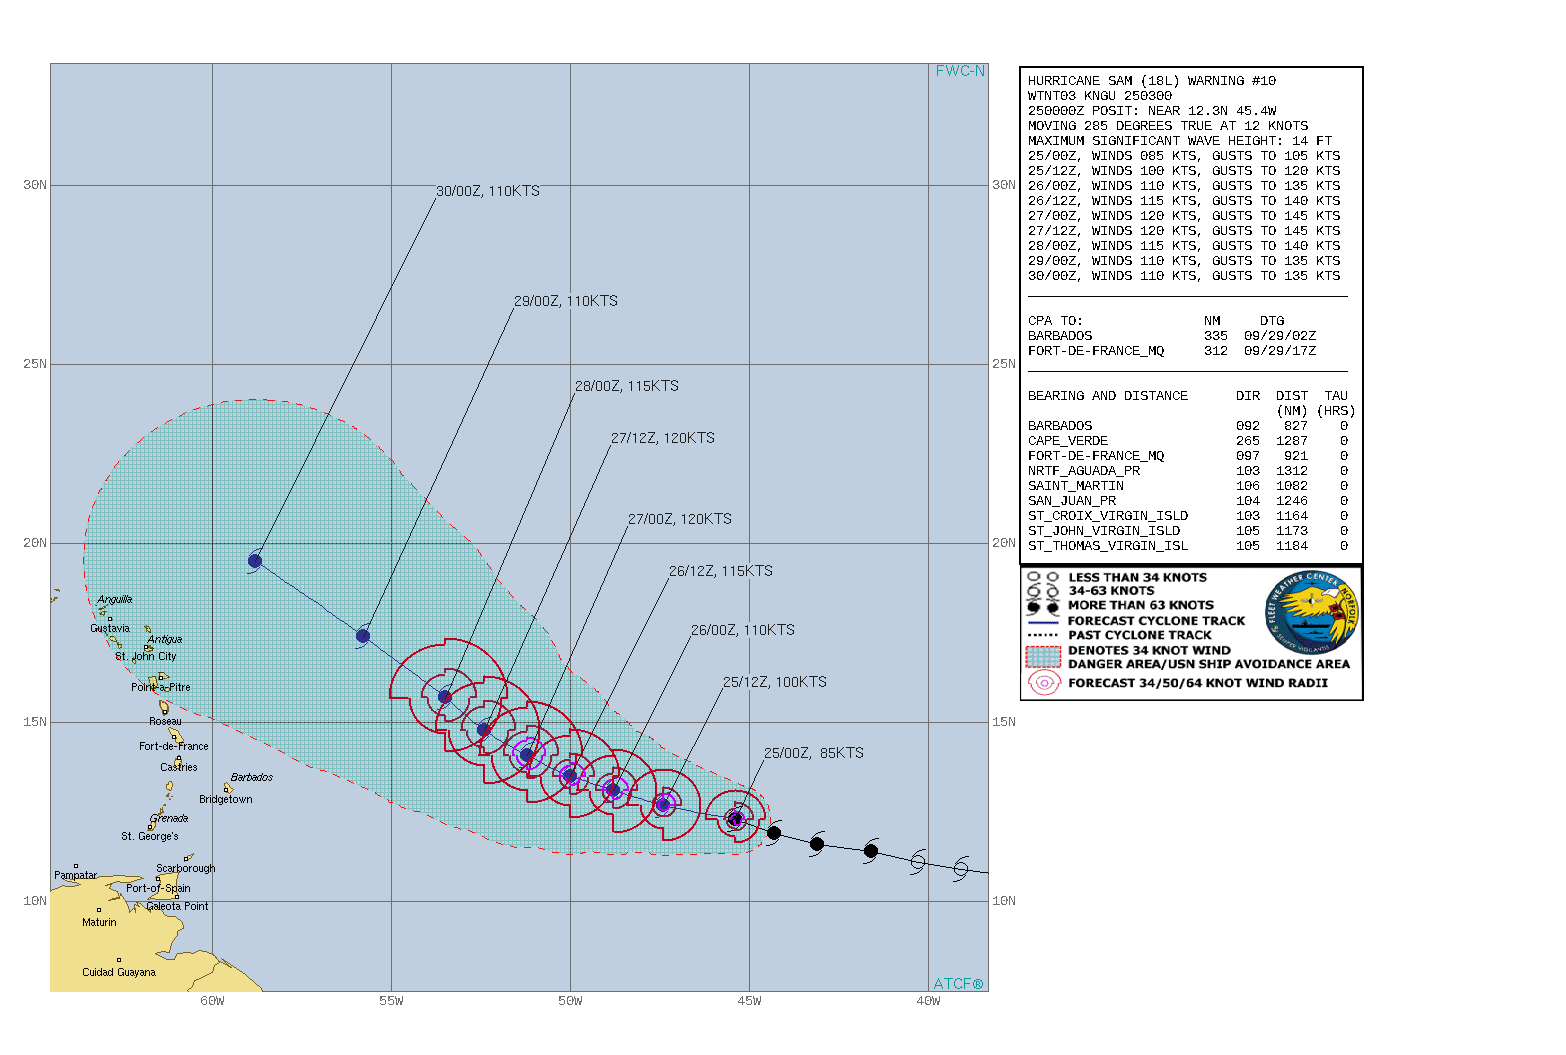 CURRENT INTENSITY IS 85KNOTS/CAT 2 AND IS FORECAST TO PEAK AT 120KNOTS/CAT 4 BY 27/00UTC.